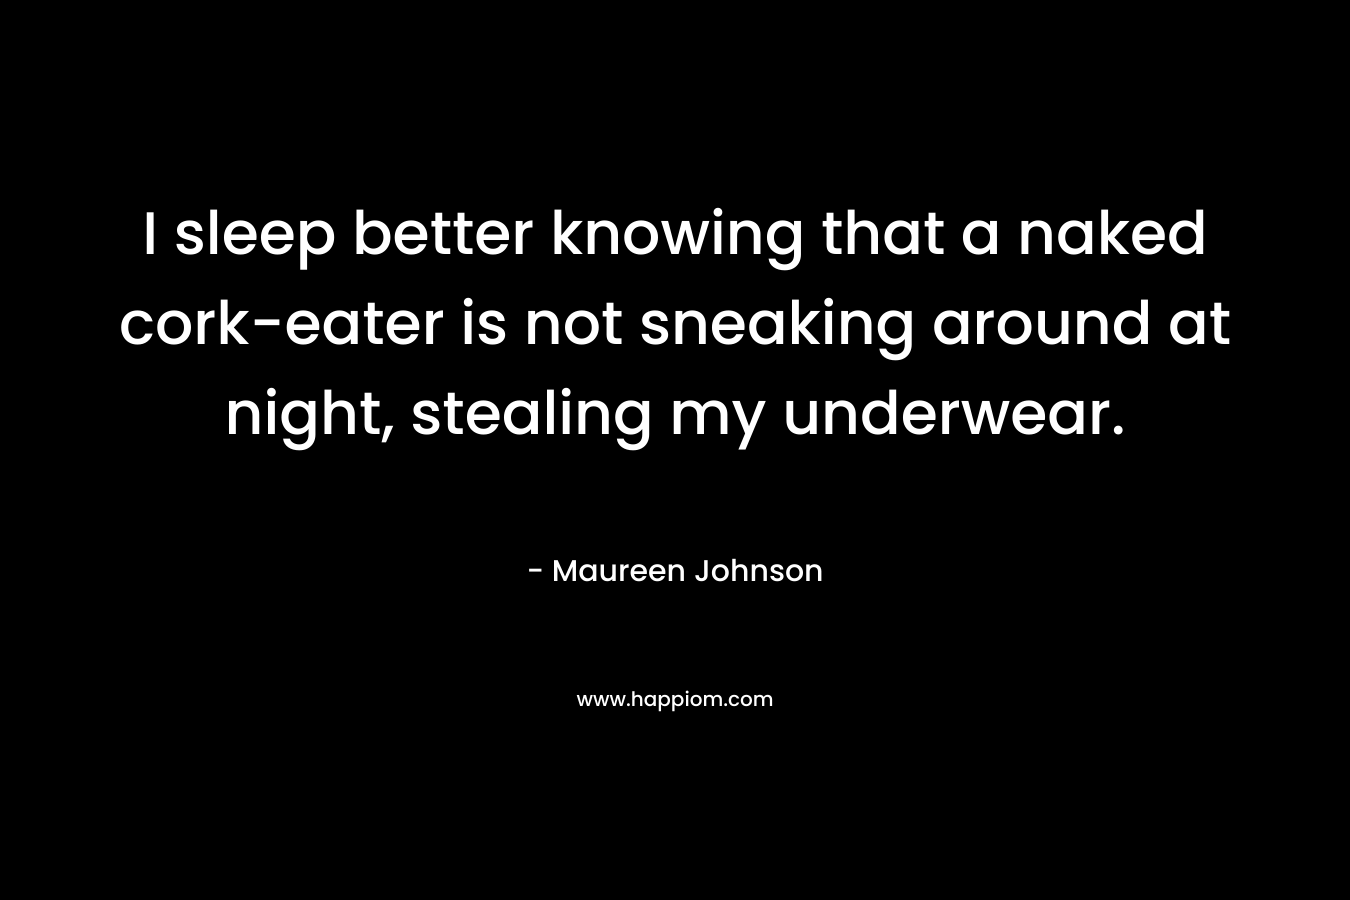 I sleep better knowing that a naked cork-eater is not sneaking around at night, stealing my underwear. 